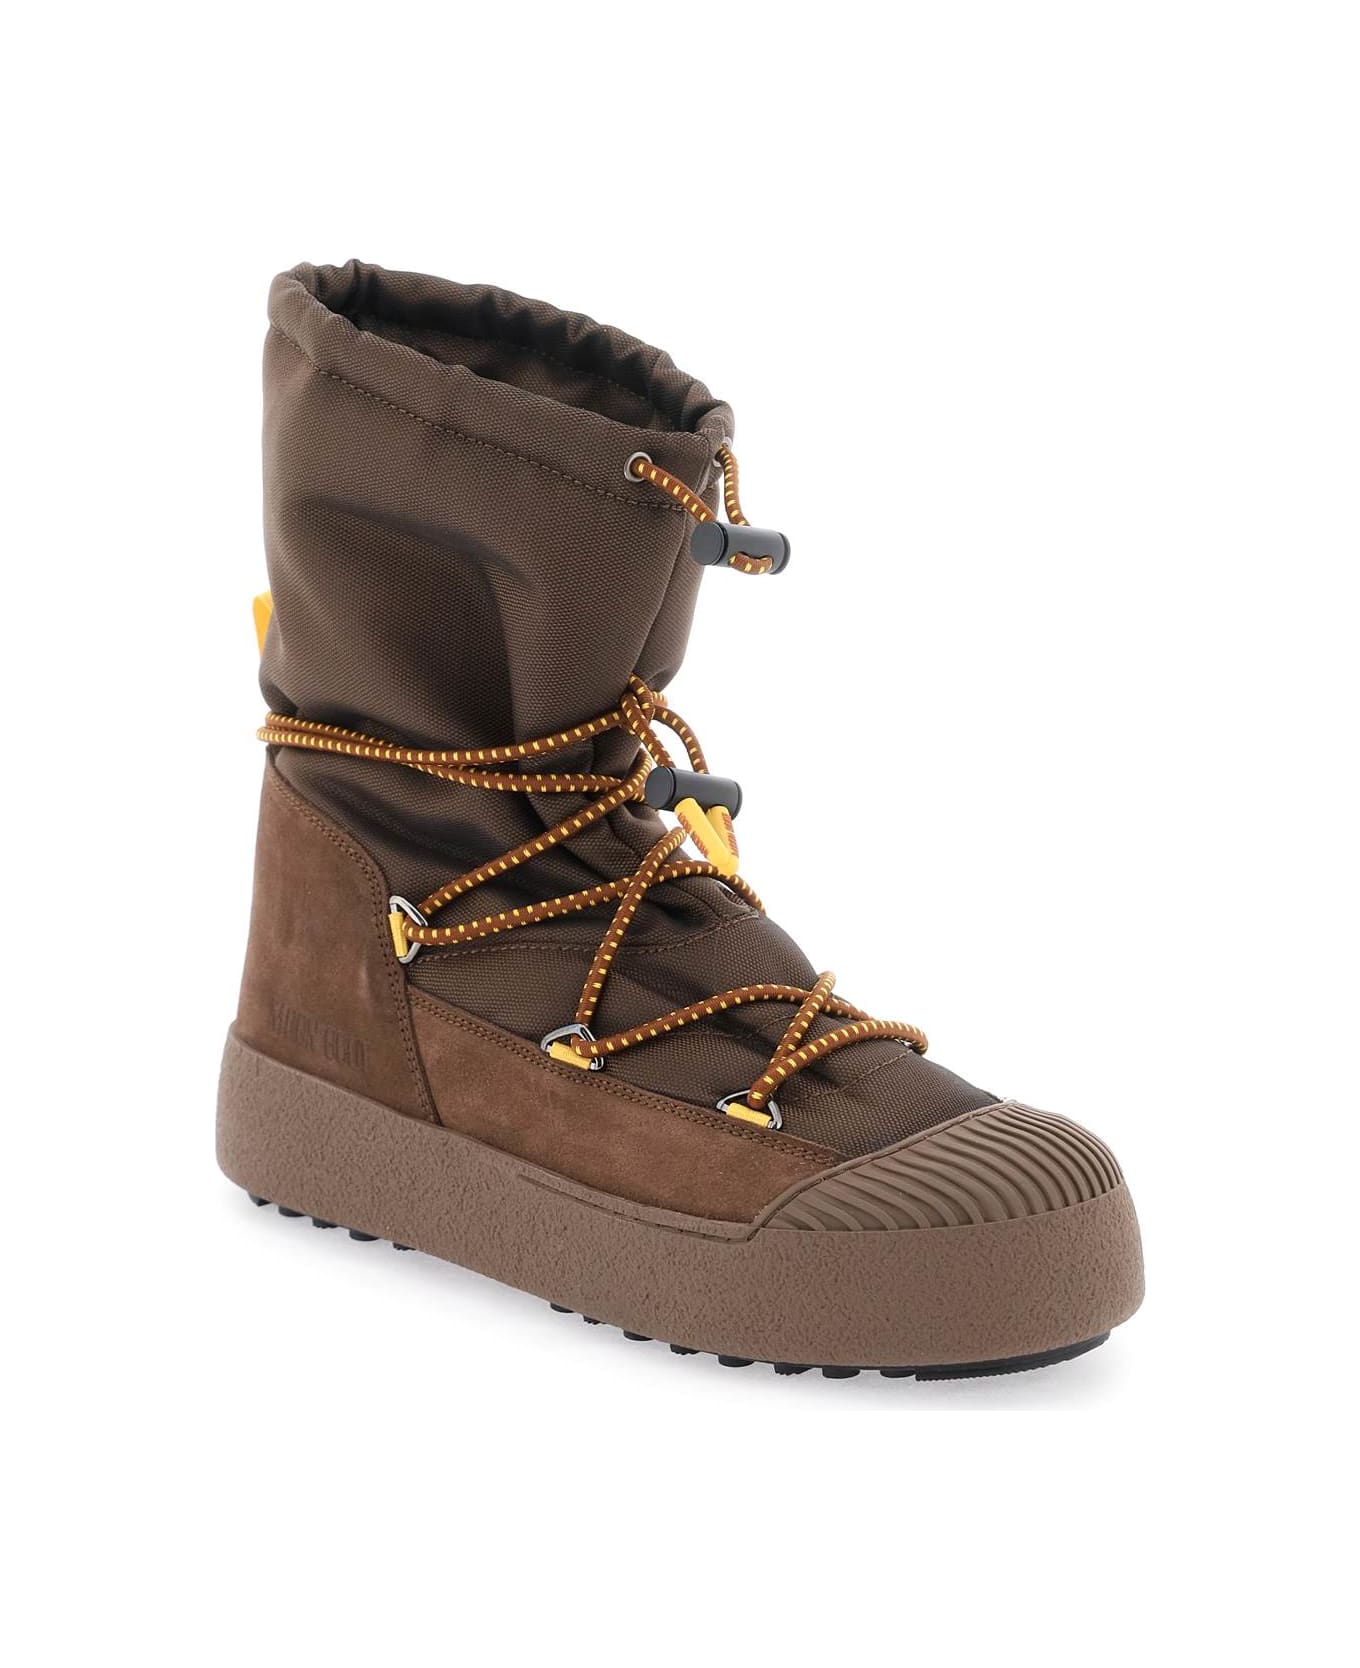 Moon Boot Mtrack Polar Boots - BROWN (Brown)